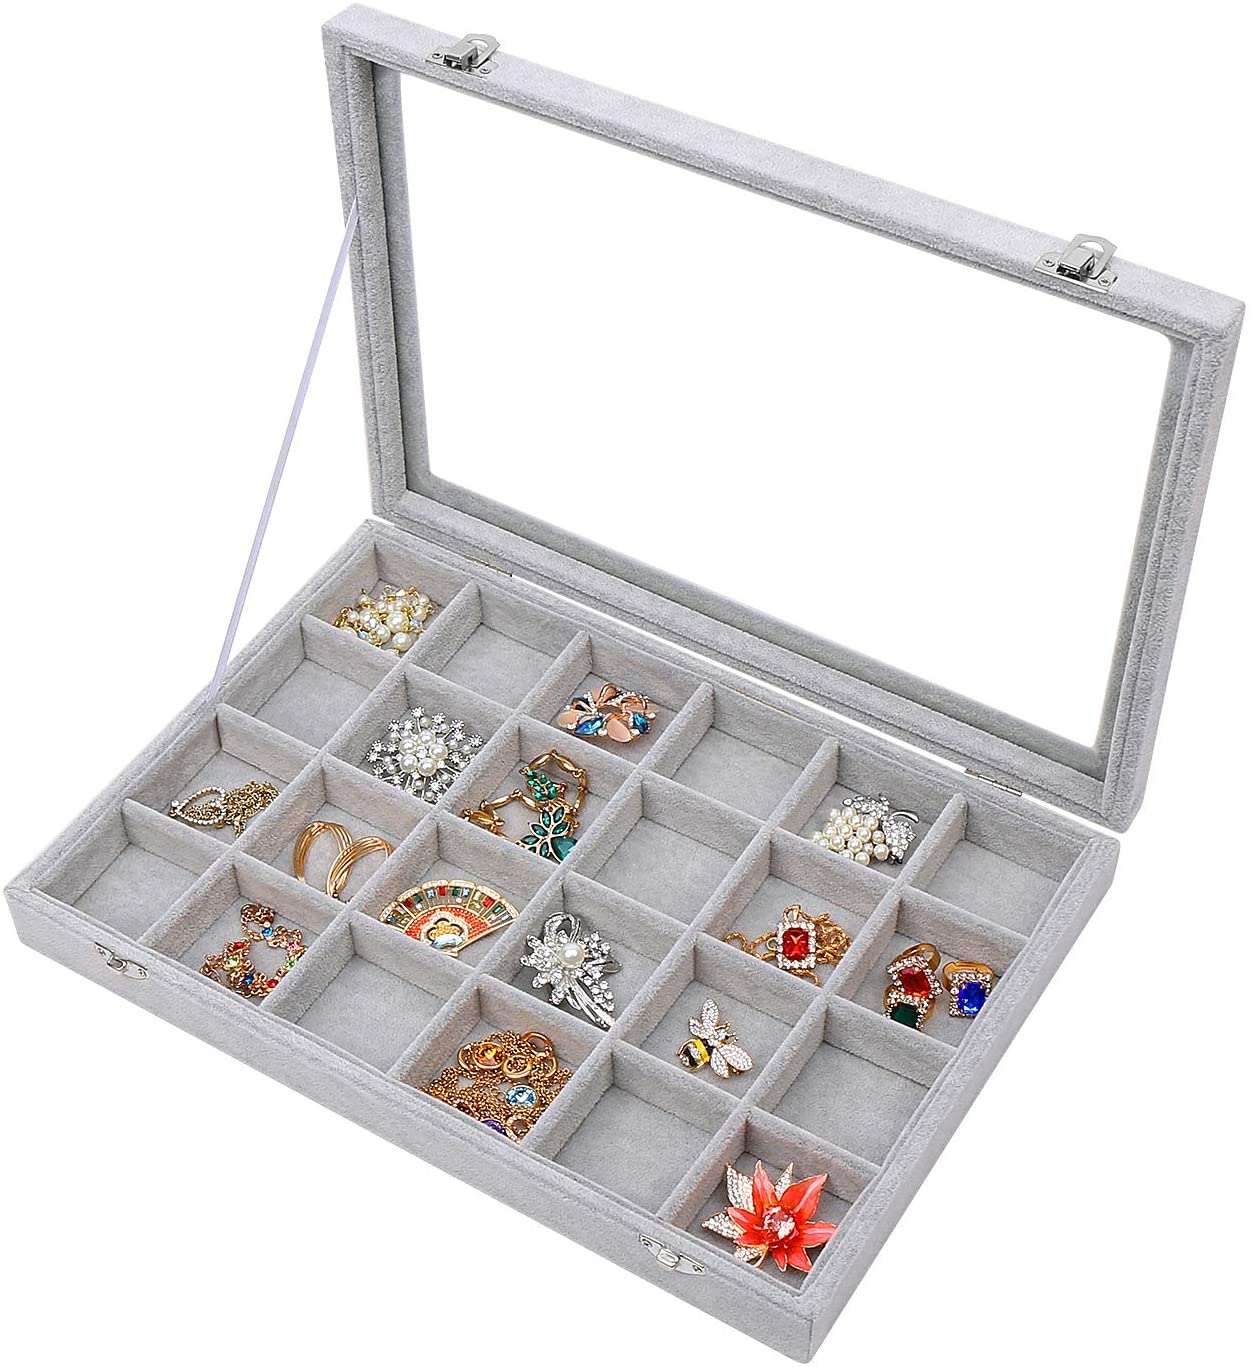 Grey Velvet Compartments Jewelry Display Case Tray for Retail Shop Trade Show 